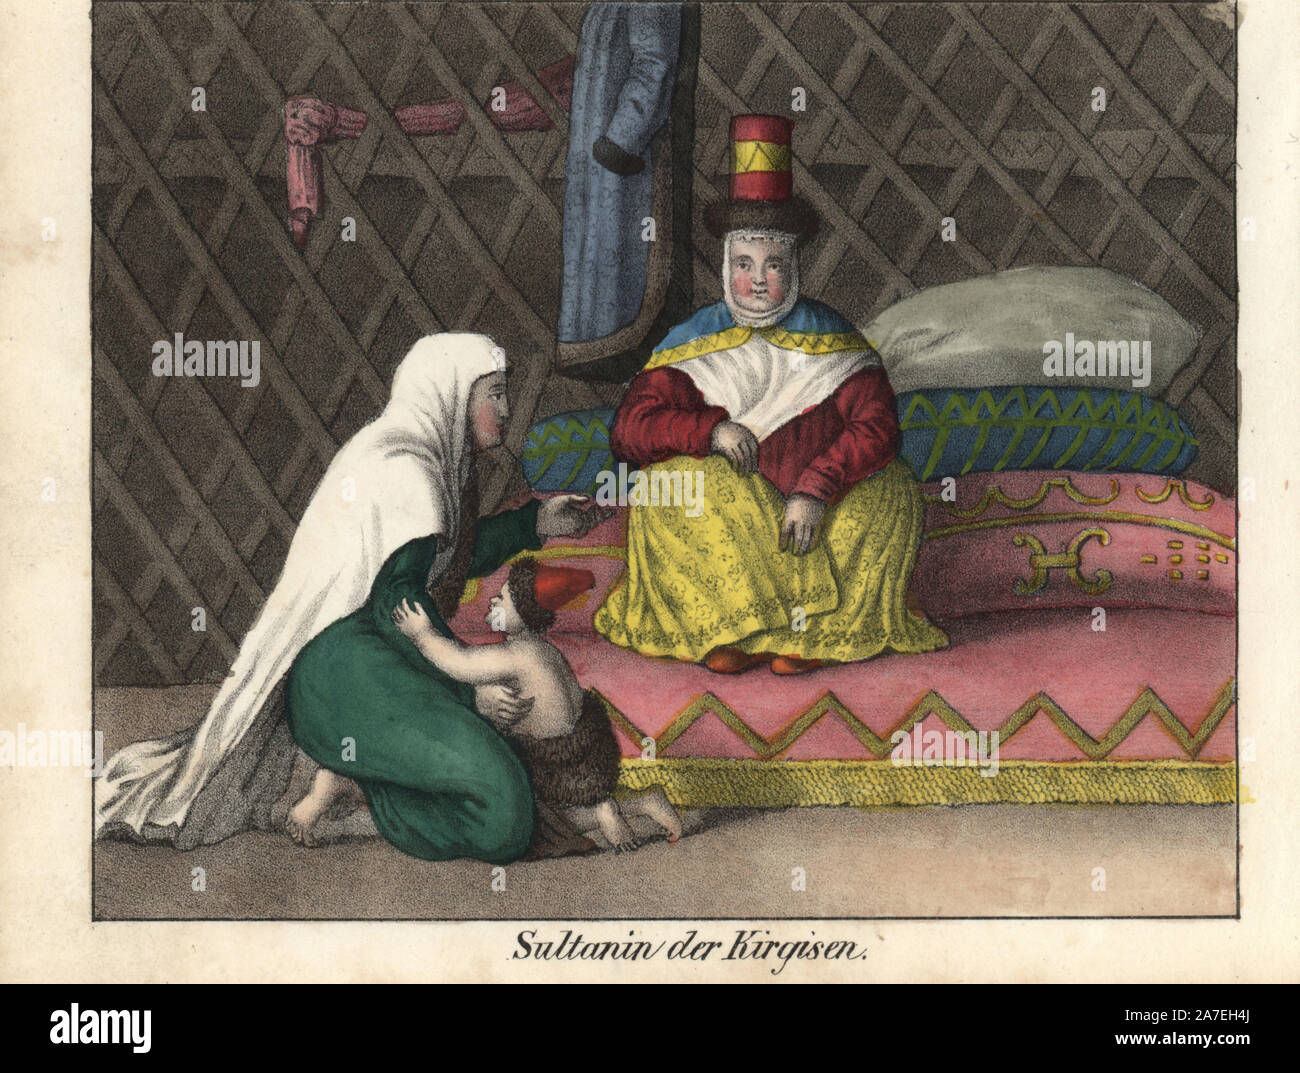 Kyrgyz sultana seated on a carpet and mattress inside a gher with woman and child. Handcoloured lithograph from Friedrich Wilhelm Goedsche's 'Vollstaendige Völkergallerie in getreuen Abbildungen' (Complete Gallery of Peoples in True Pictures), Meissen, circa 1835-1840. Goedsche (1785-1863) was a German writer, bookseller and publisher in Meissen. Many of the illustrations were adapted from Bertuch's 'Bilderbuch fur Kinder' and others. Stock Photo